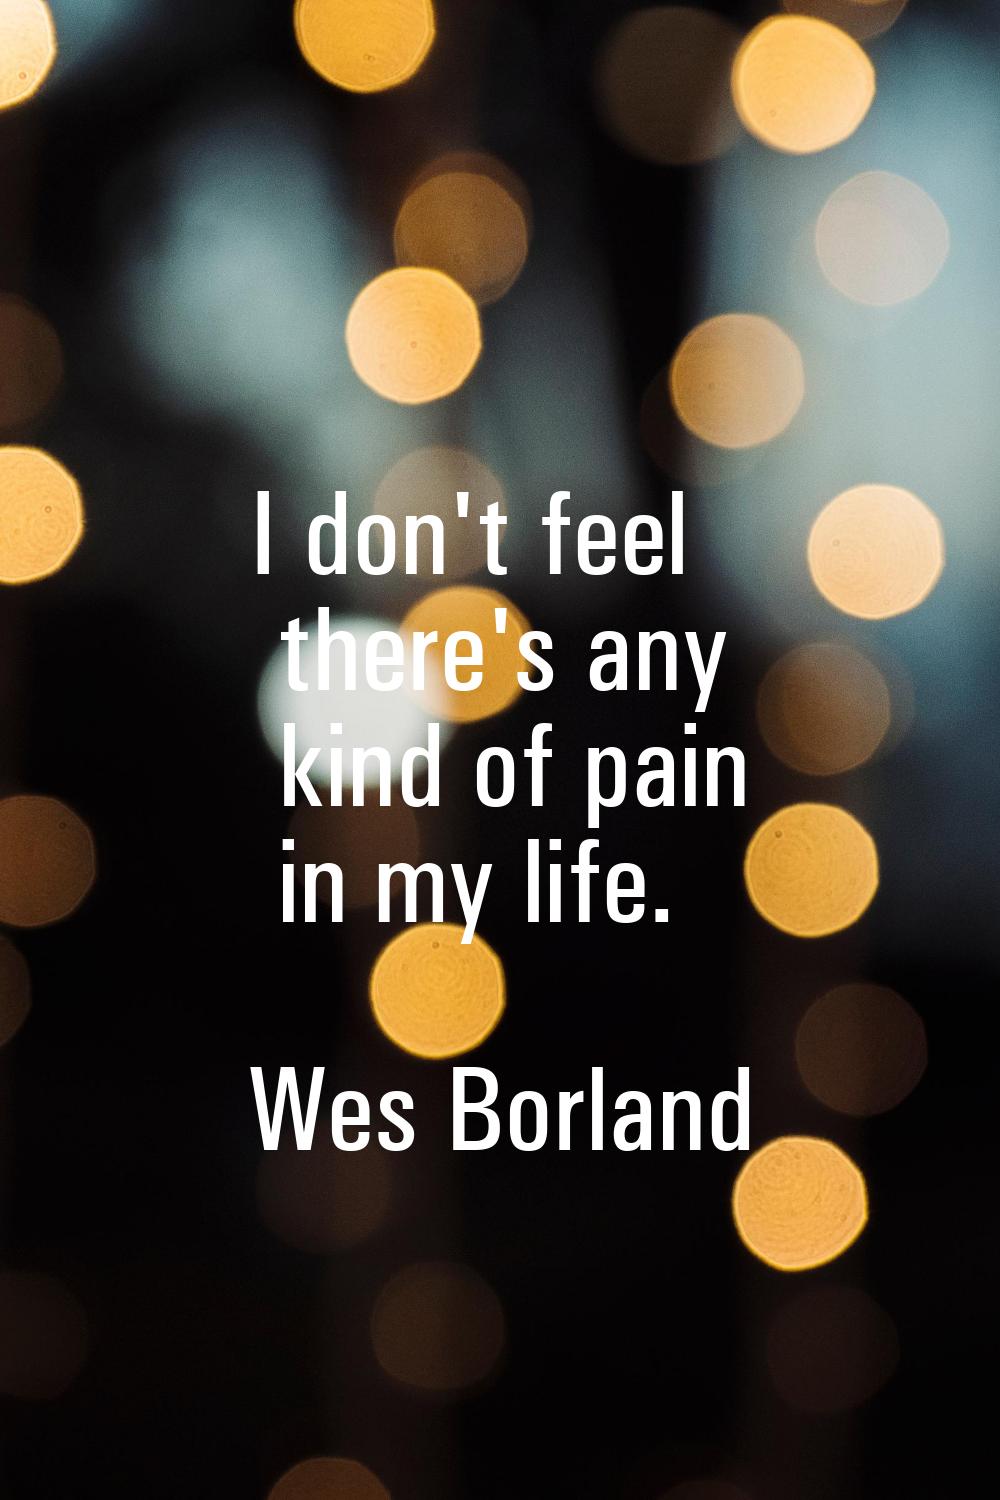 I don't feel there's any kind of pain in my life.